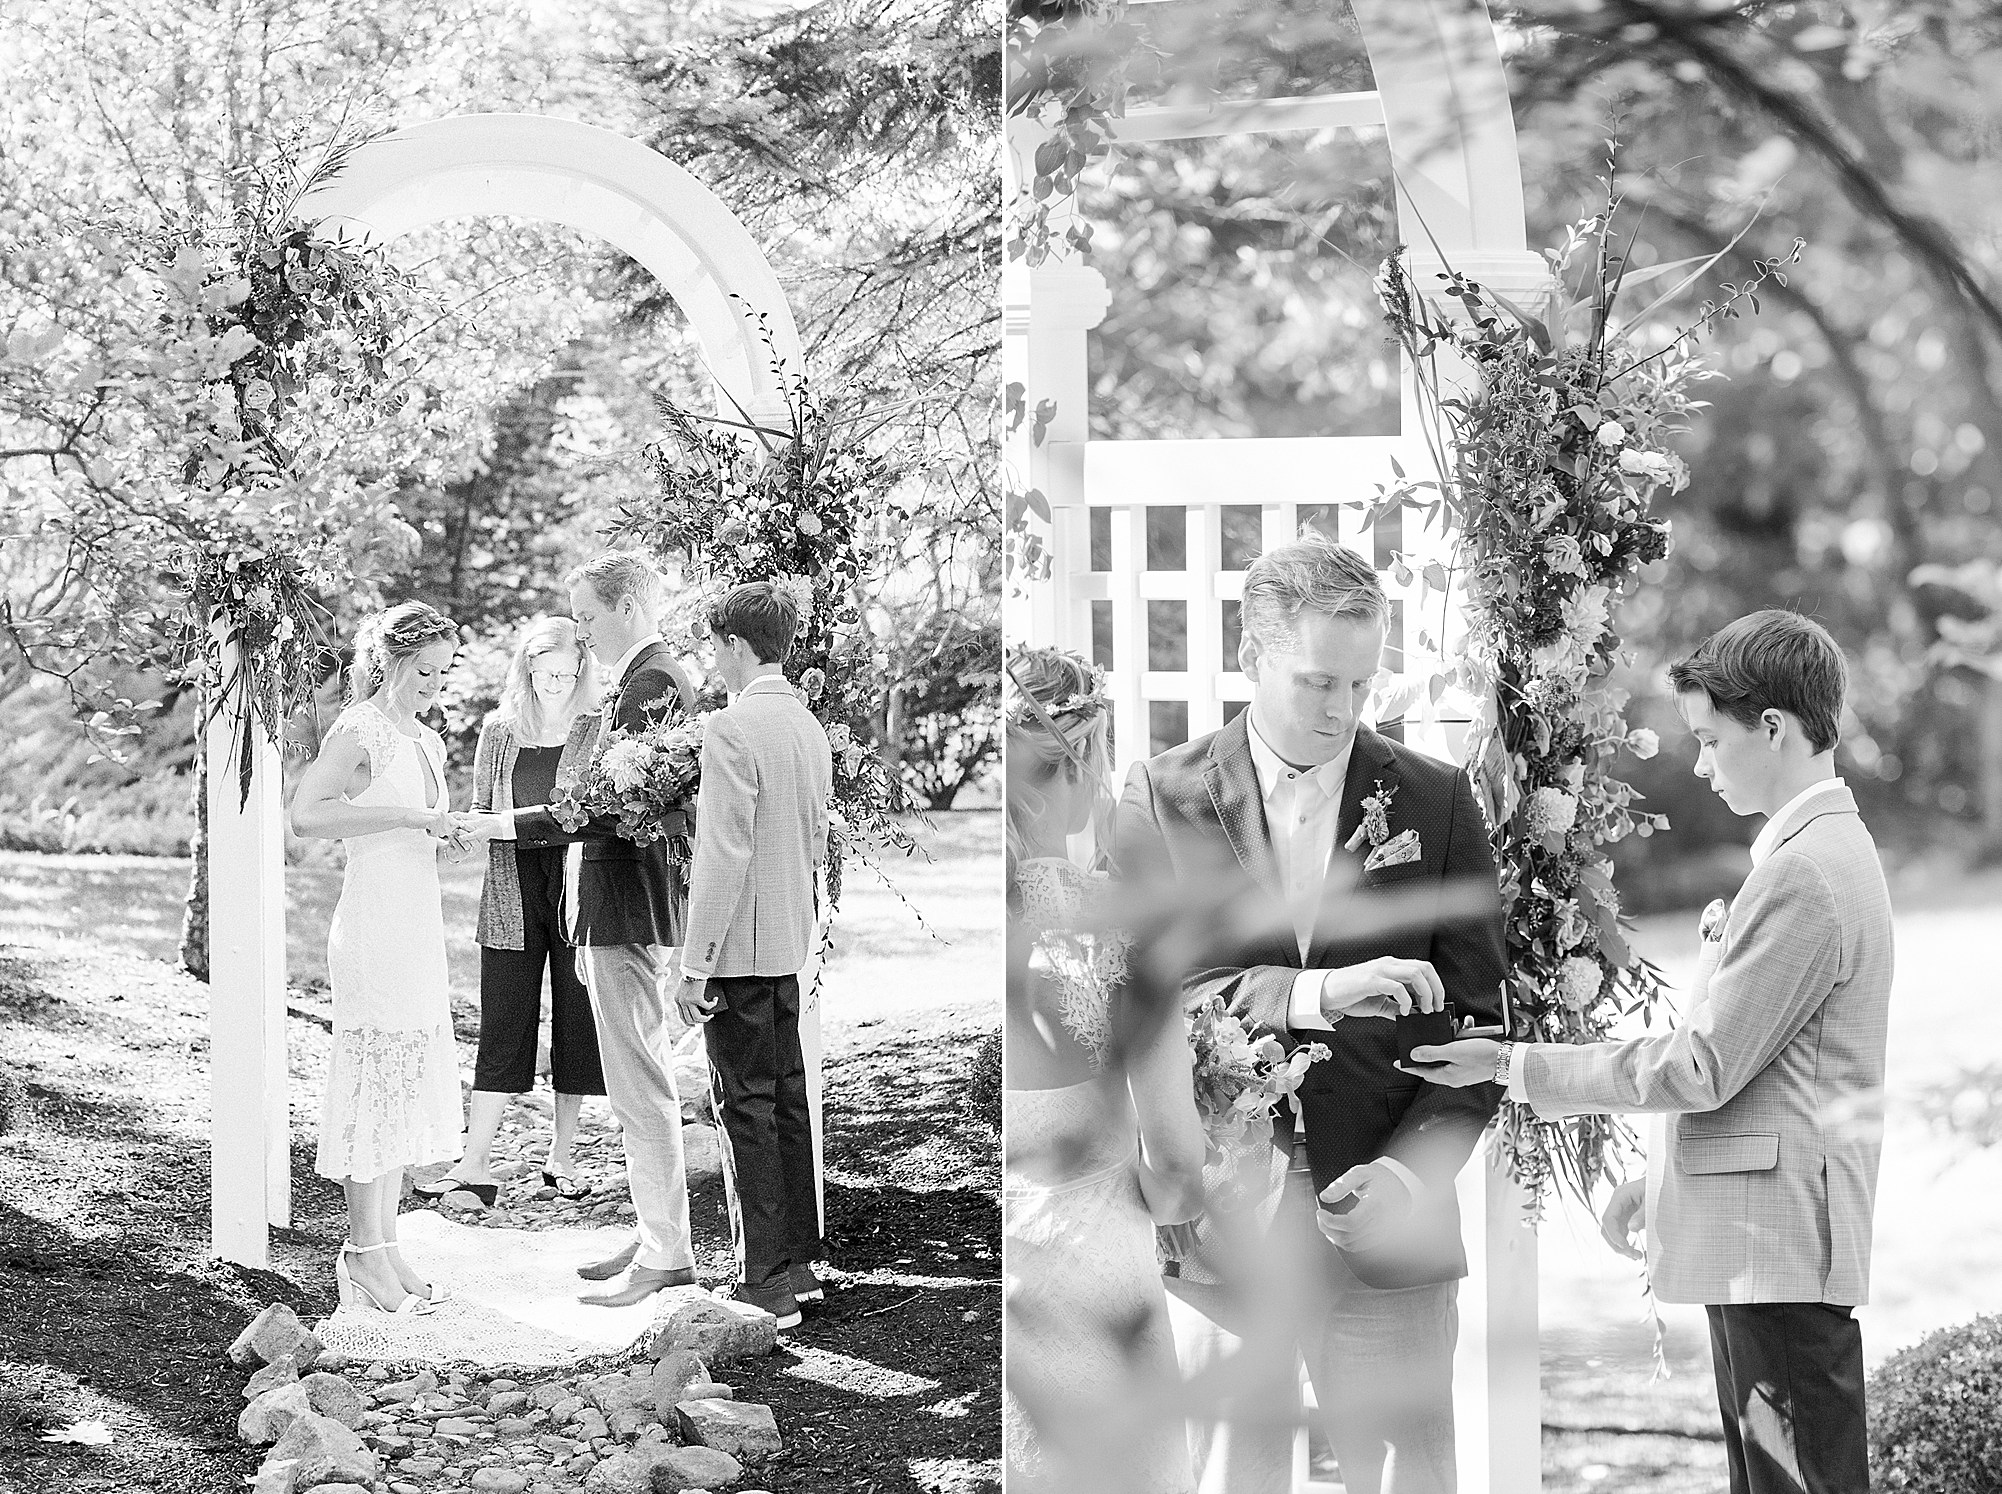 exchanging rings at micro wedding in MA - black and white photo